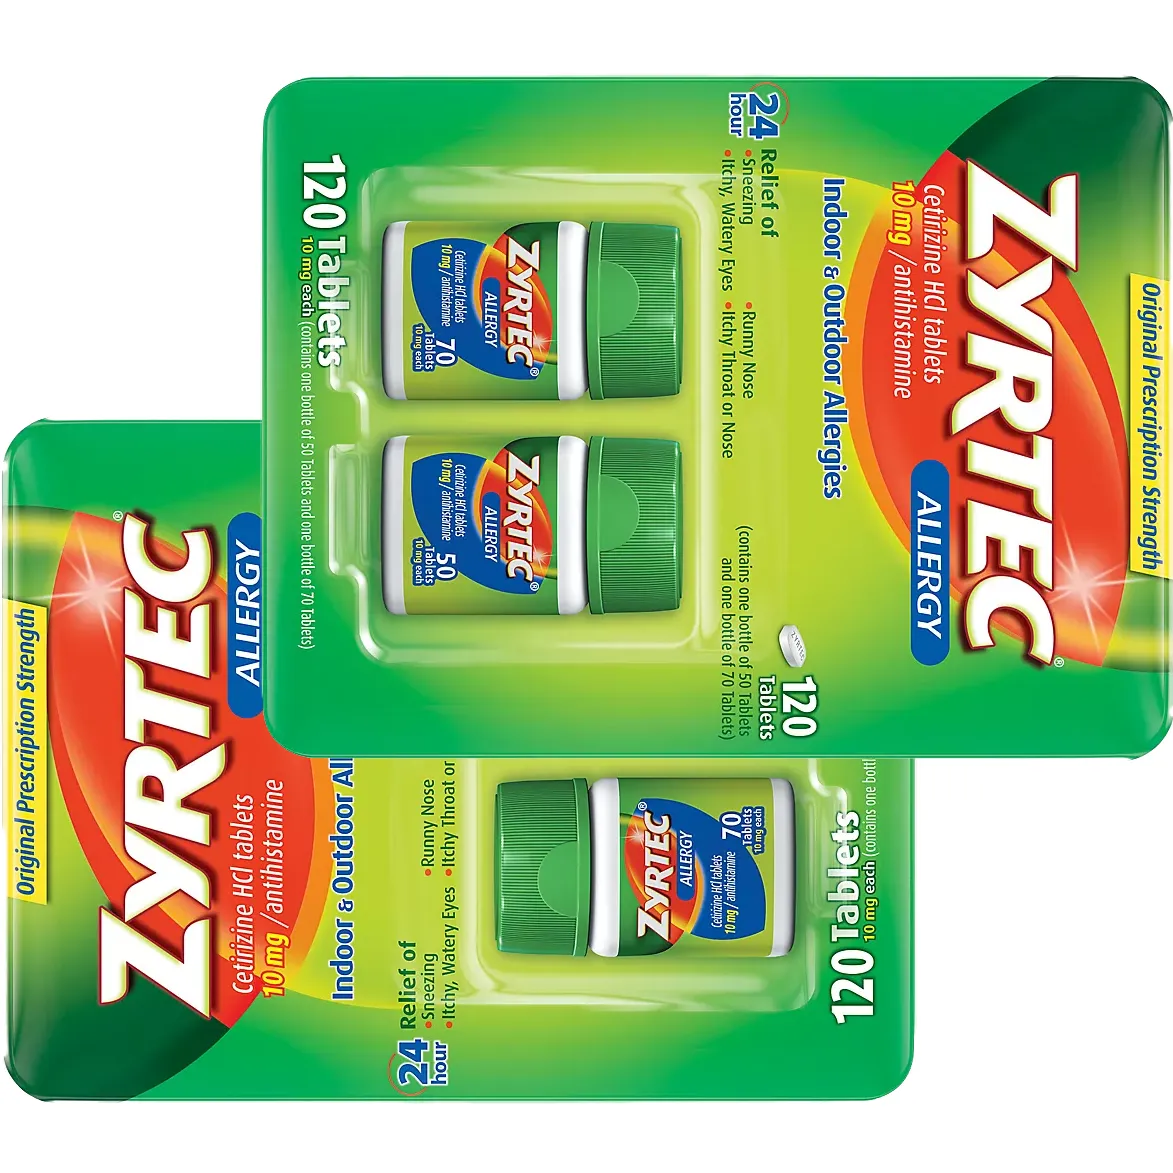 Free Zyrtec 24 Hour Allergy Relief Tablets